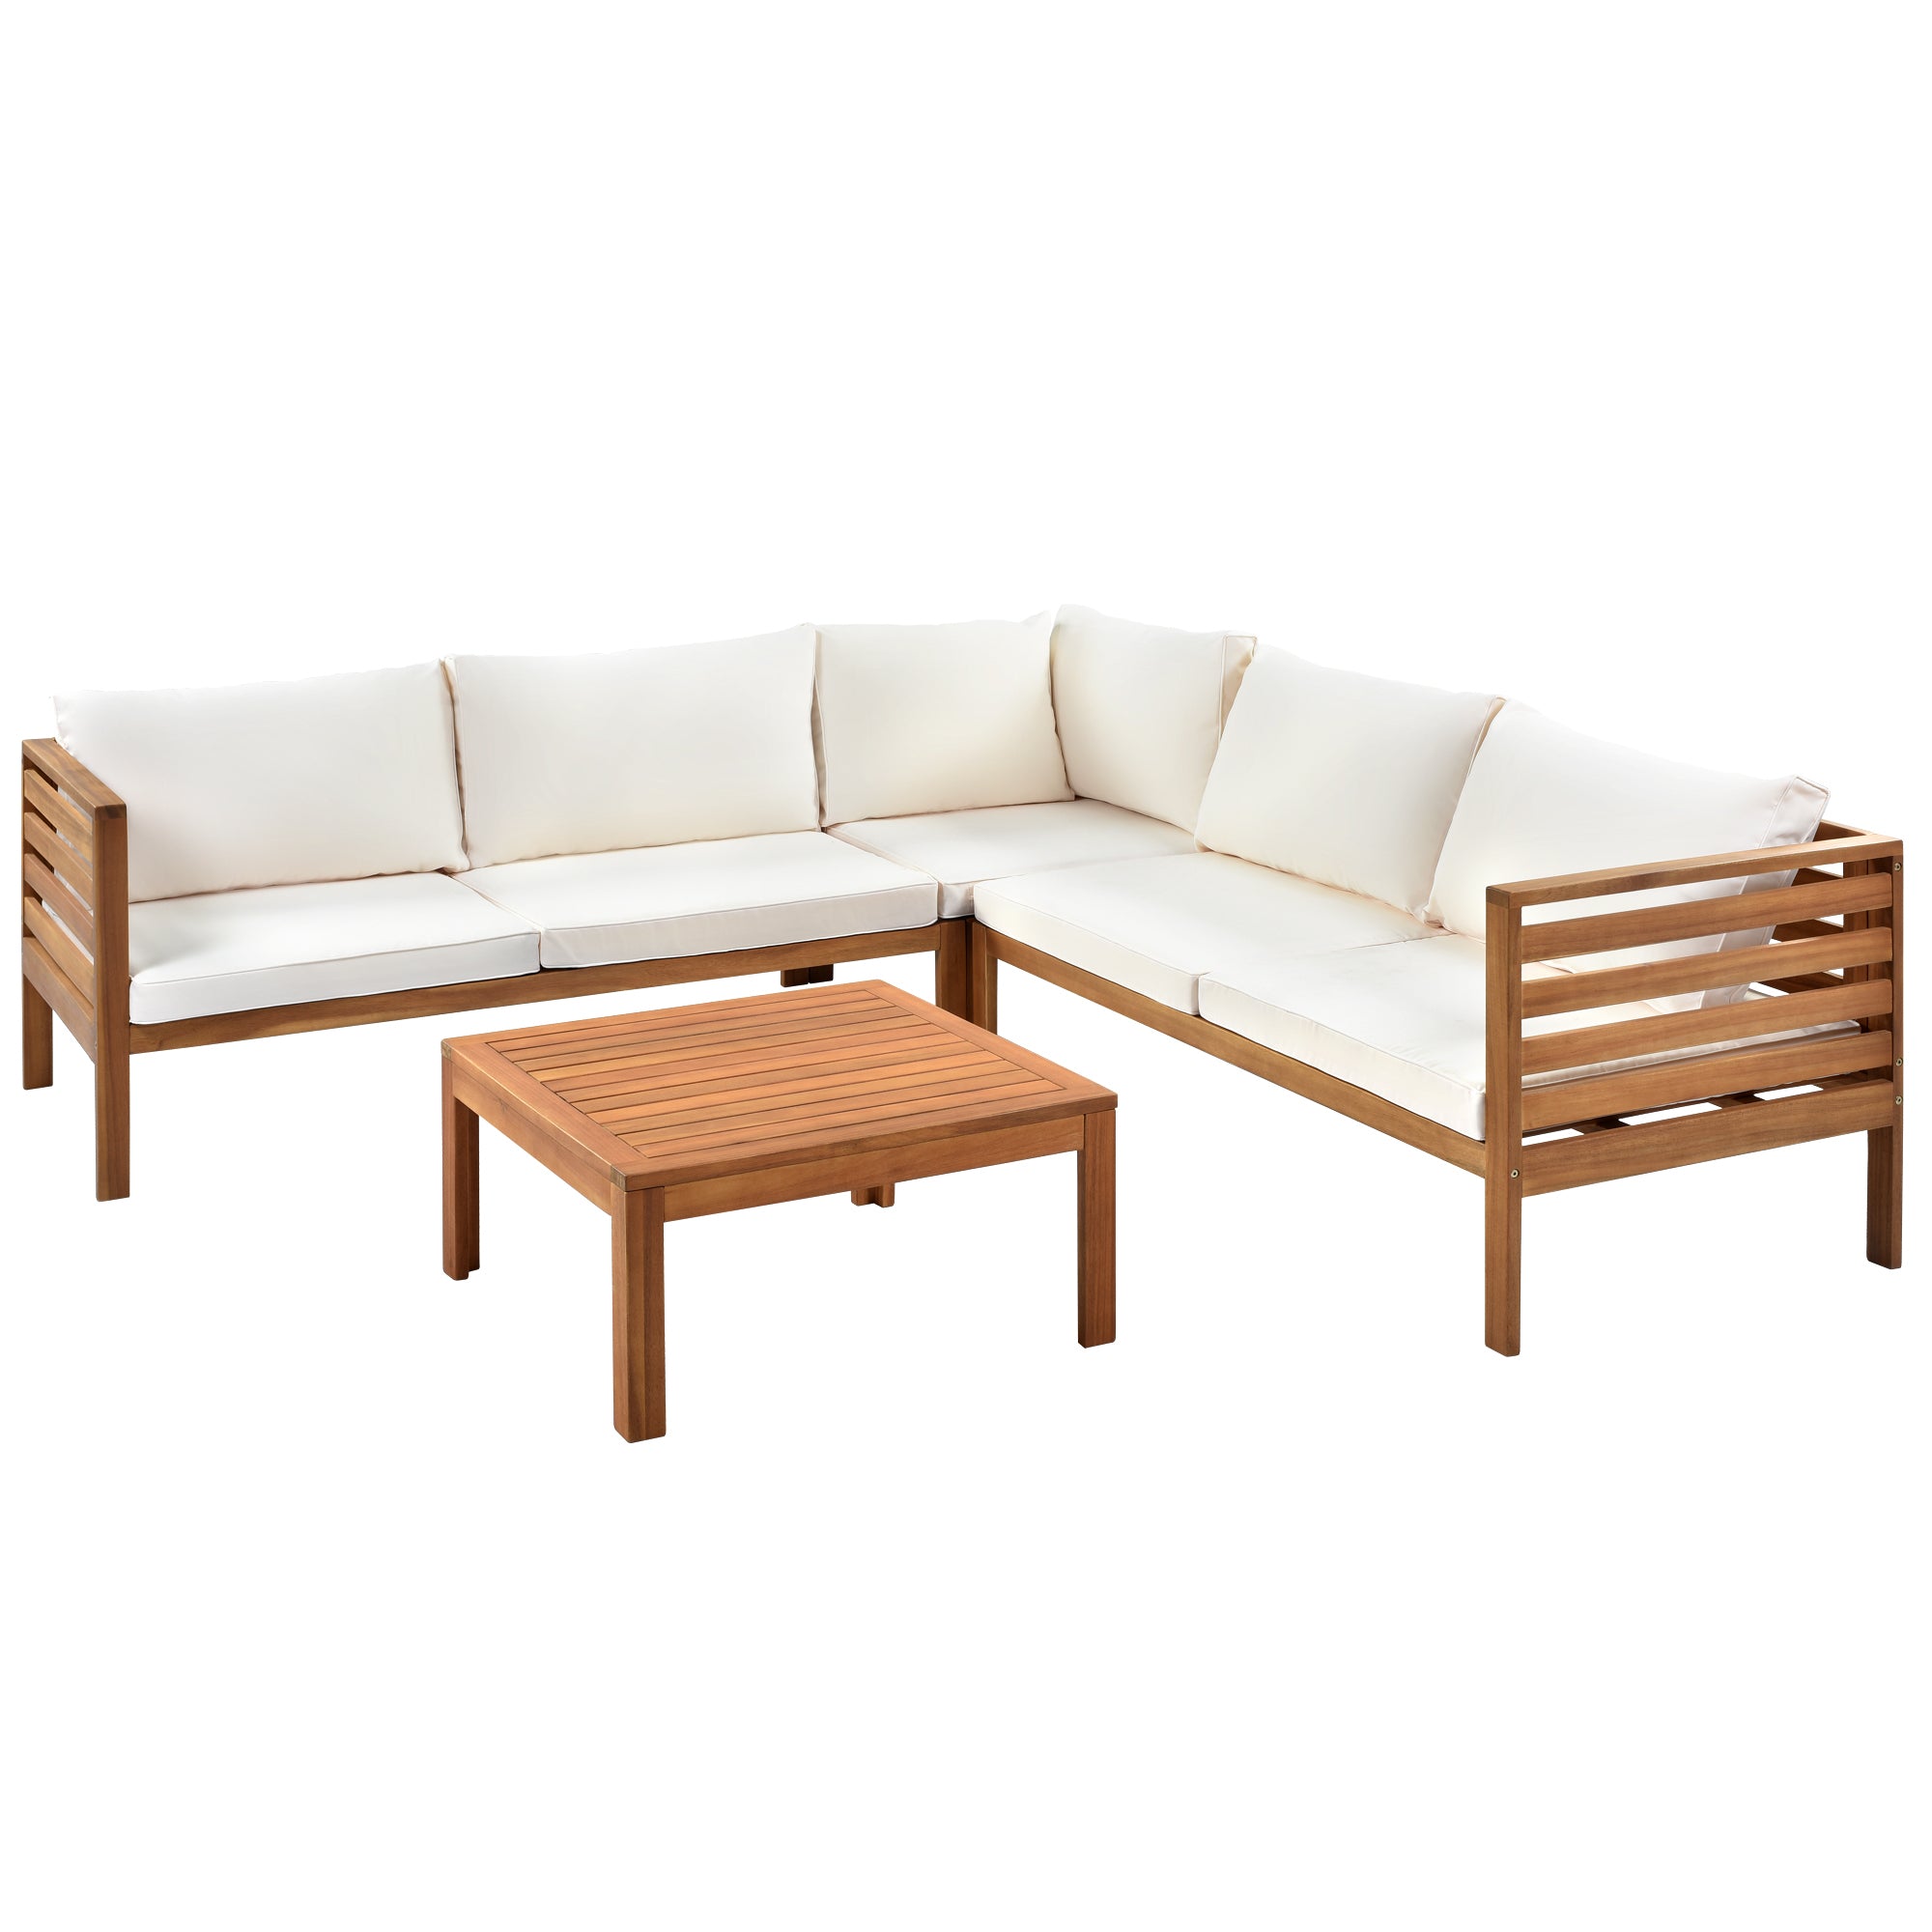 Outdoor Wood Sofa Set with Beige Cushions, Water-Resistant & UV Protected Texture, Coffee Table